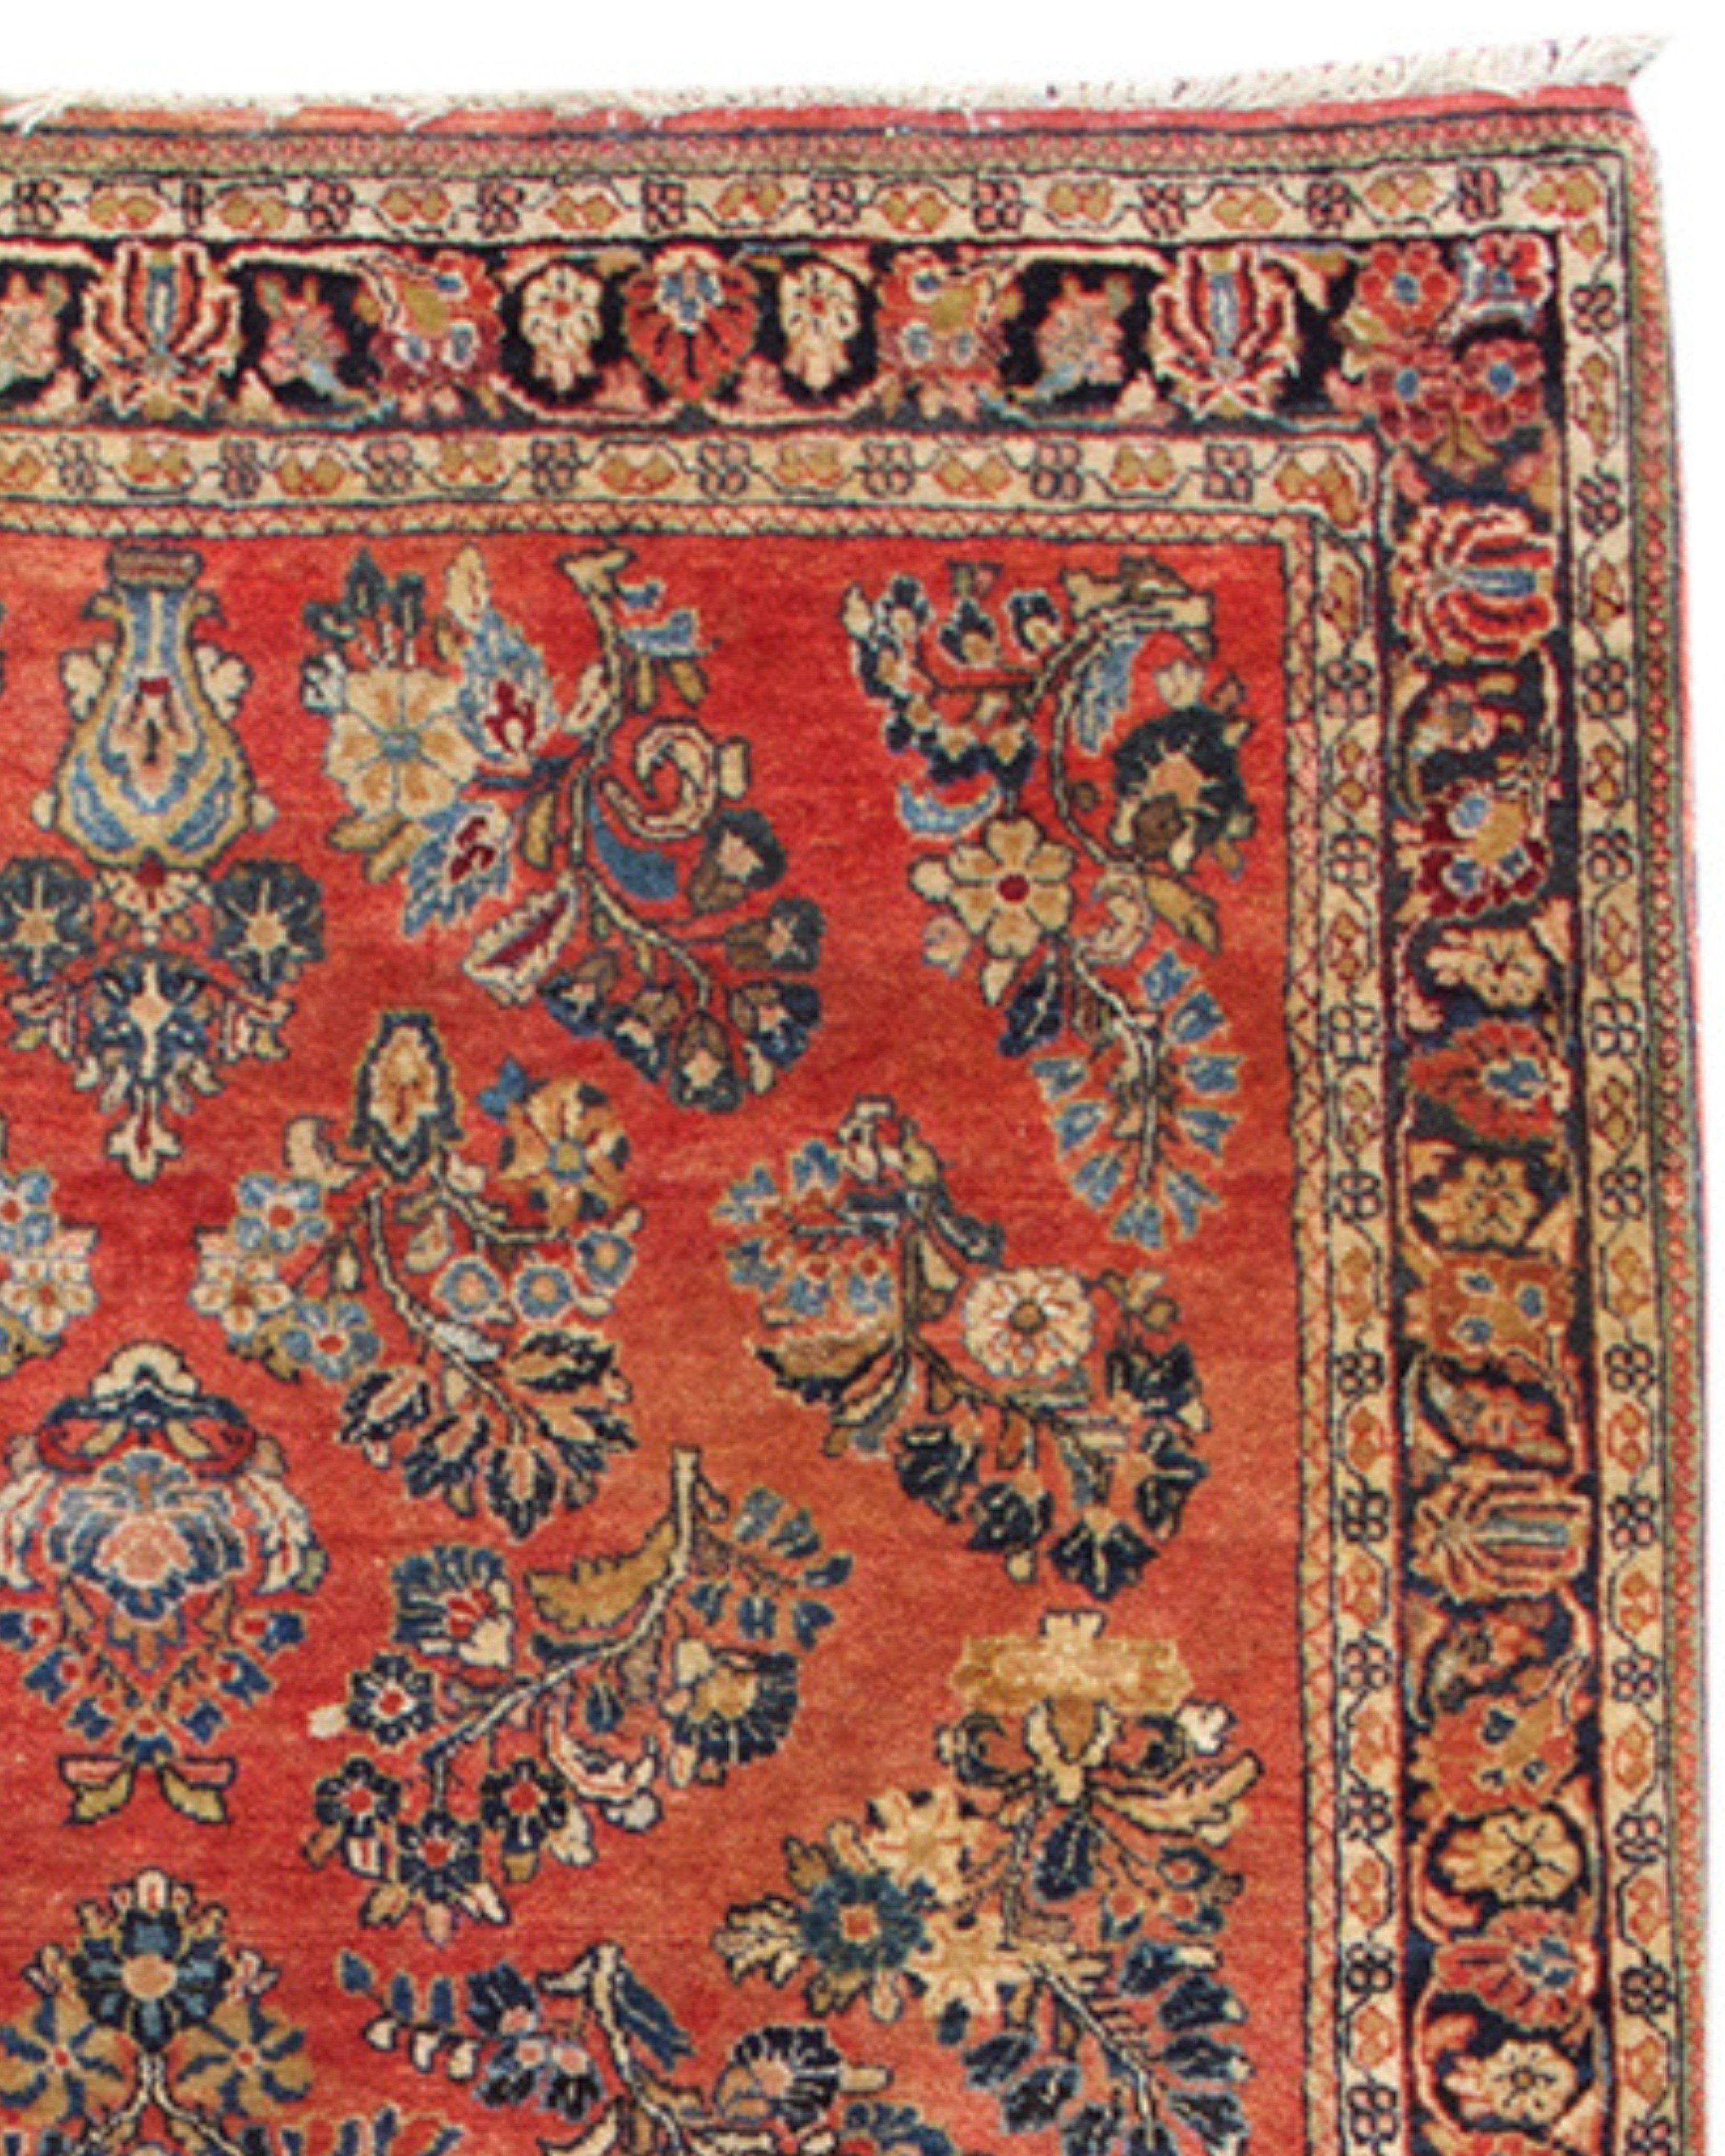 Antique Persian Sarouk Rug, 20th Century

Additional Information:
Dimensions: 3'4